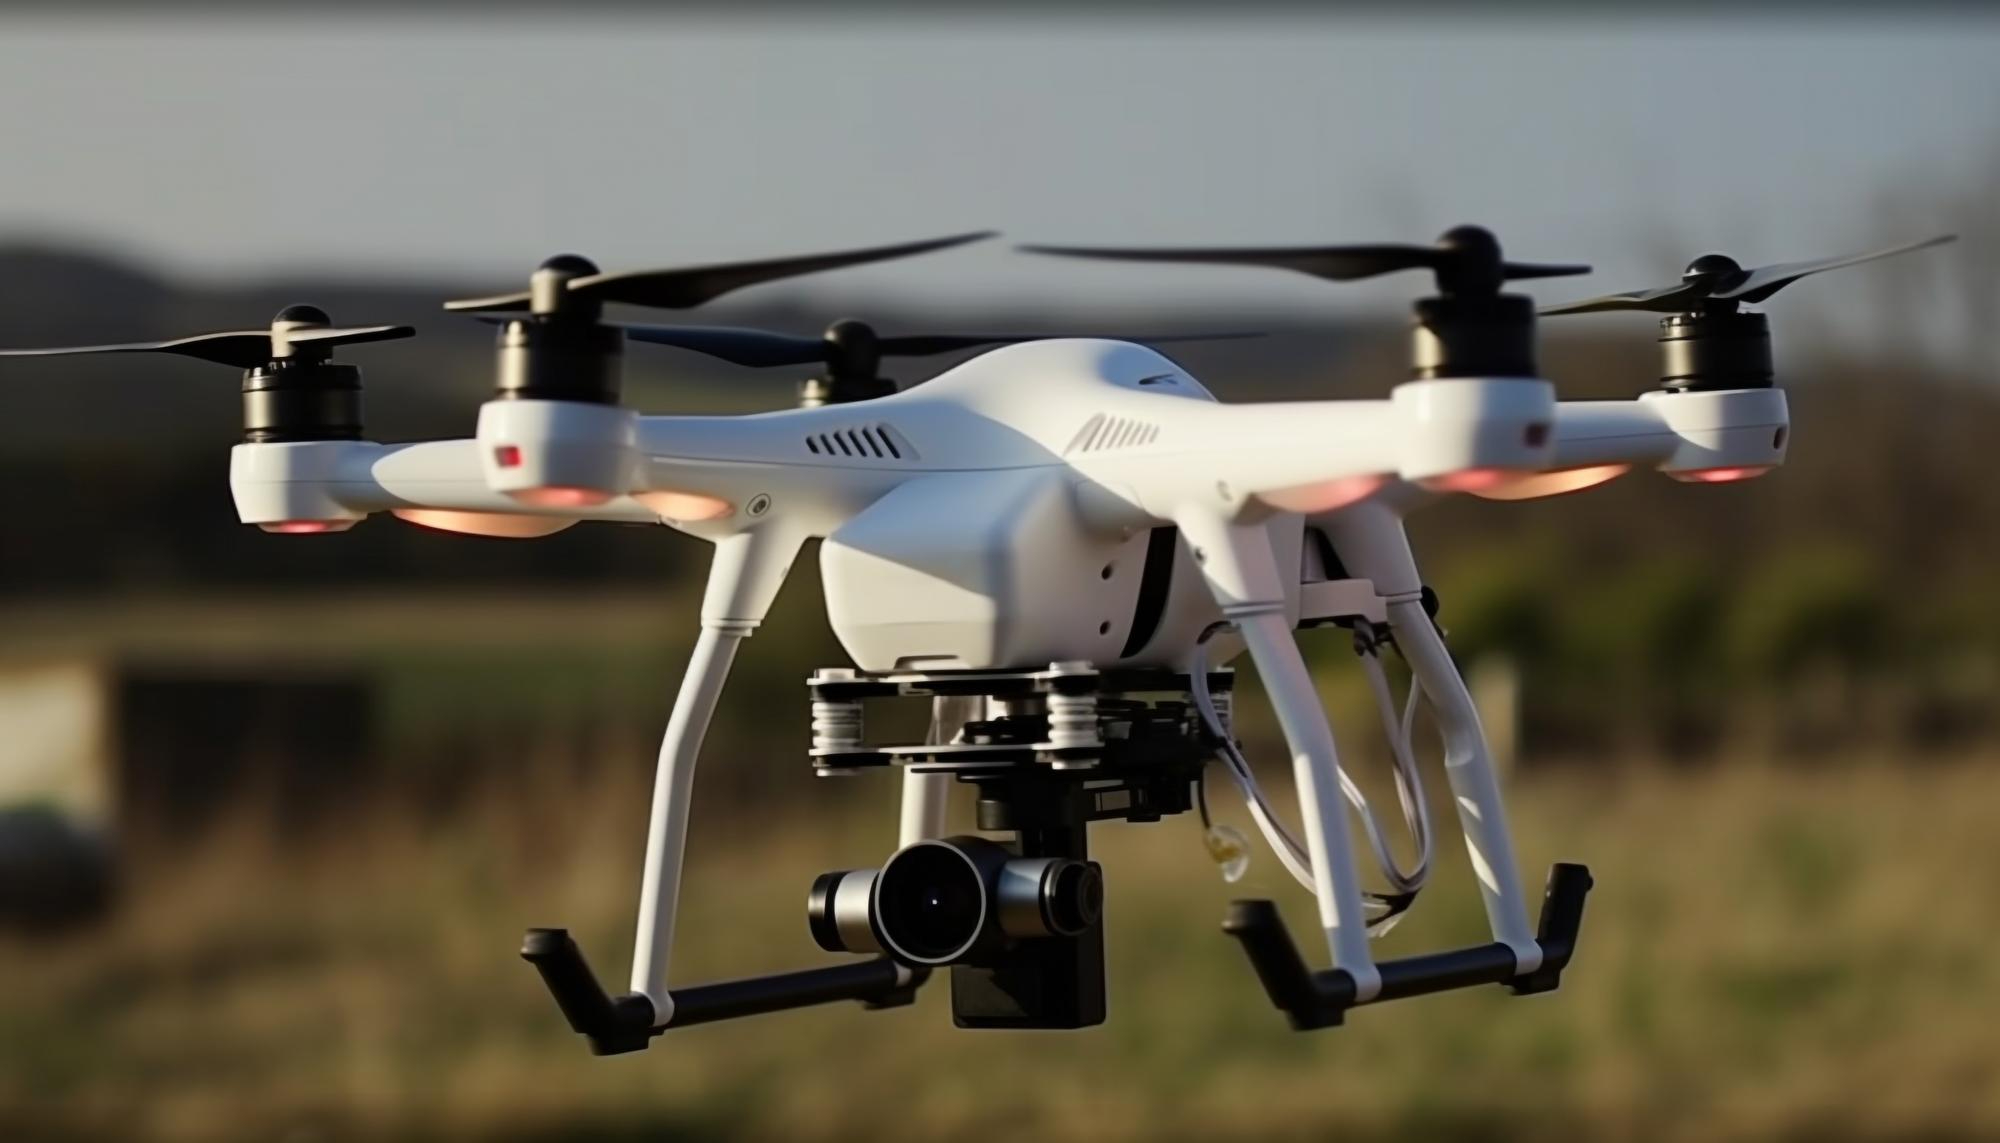 Agricultural Dronеs in Smart Farming: Taking Farming to Nеw Hеights